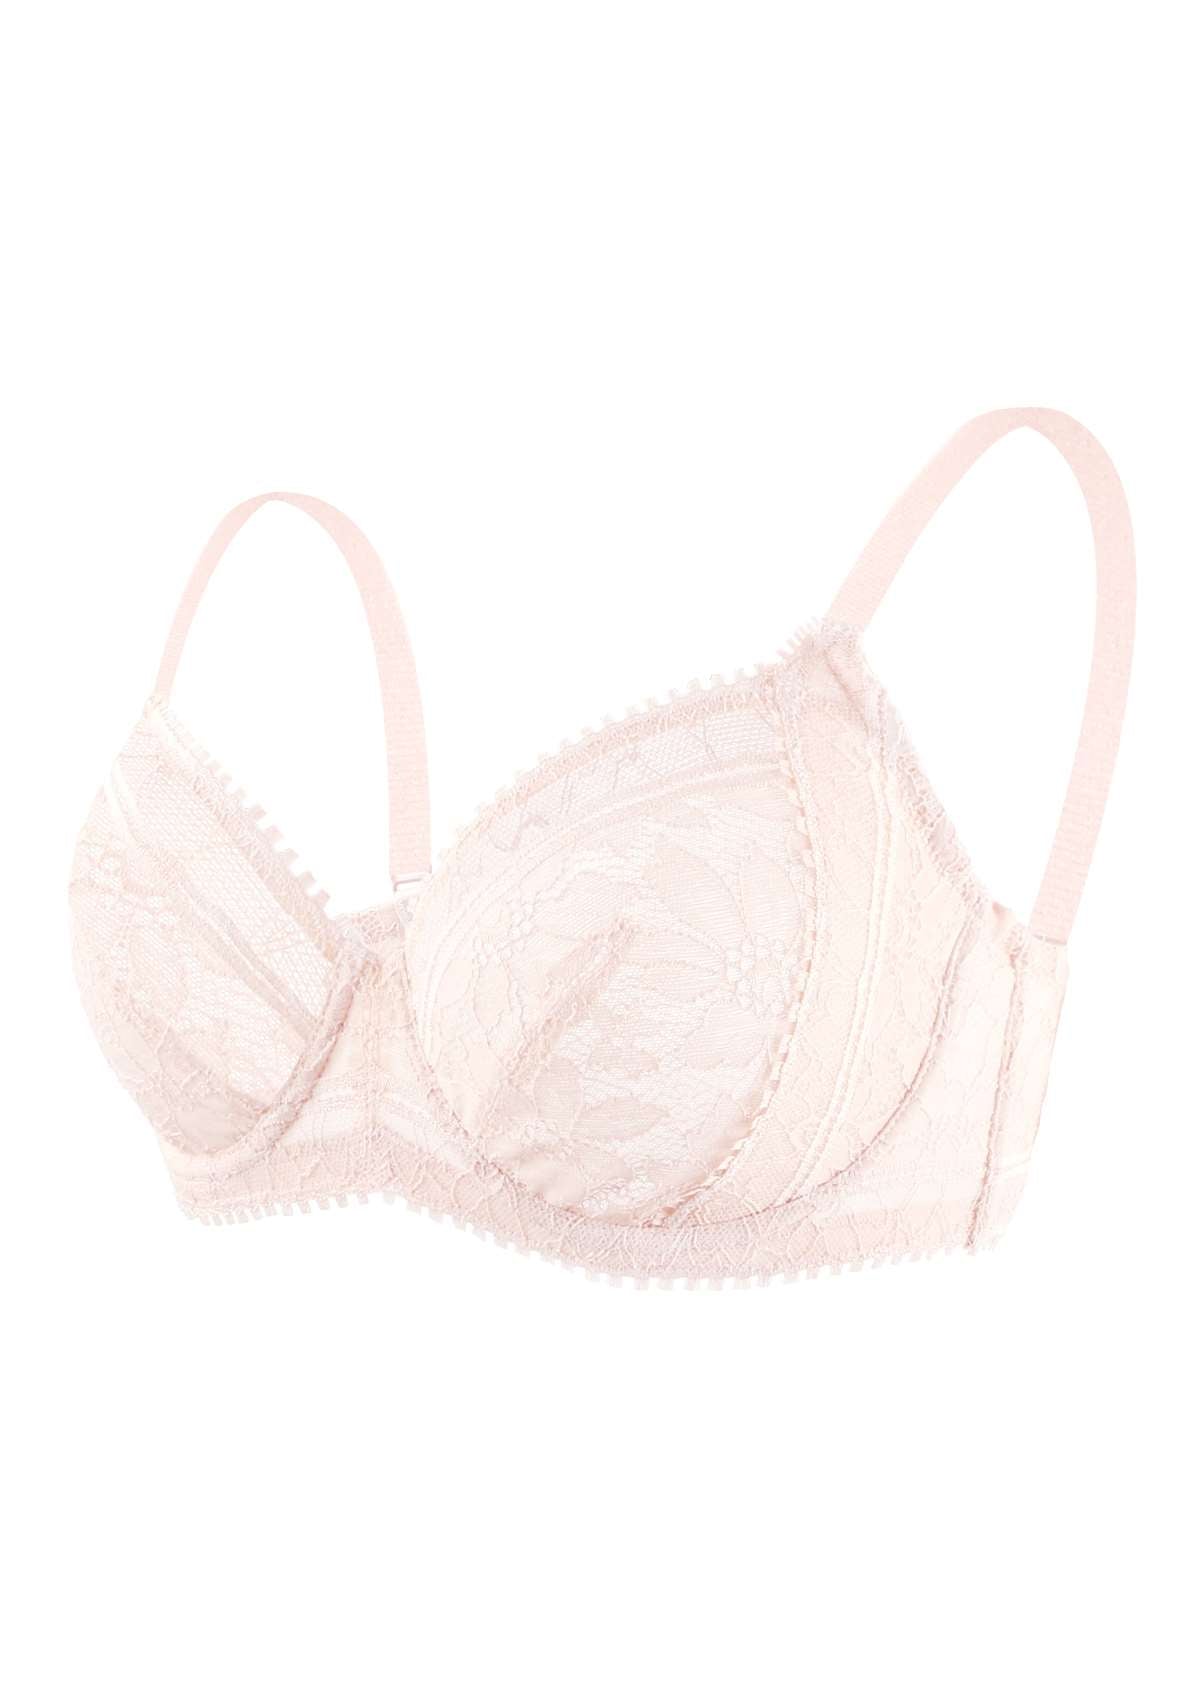 HSIA Silene Floral Delicate Unlined Lace Soft Cup Uplift Bra - Champagne / 34 / DDD/F